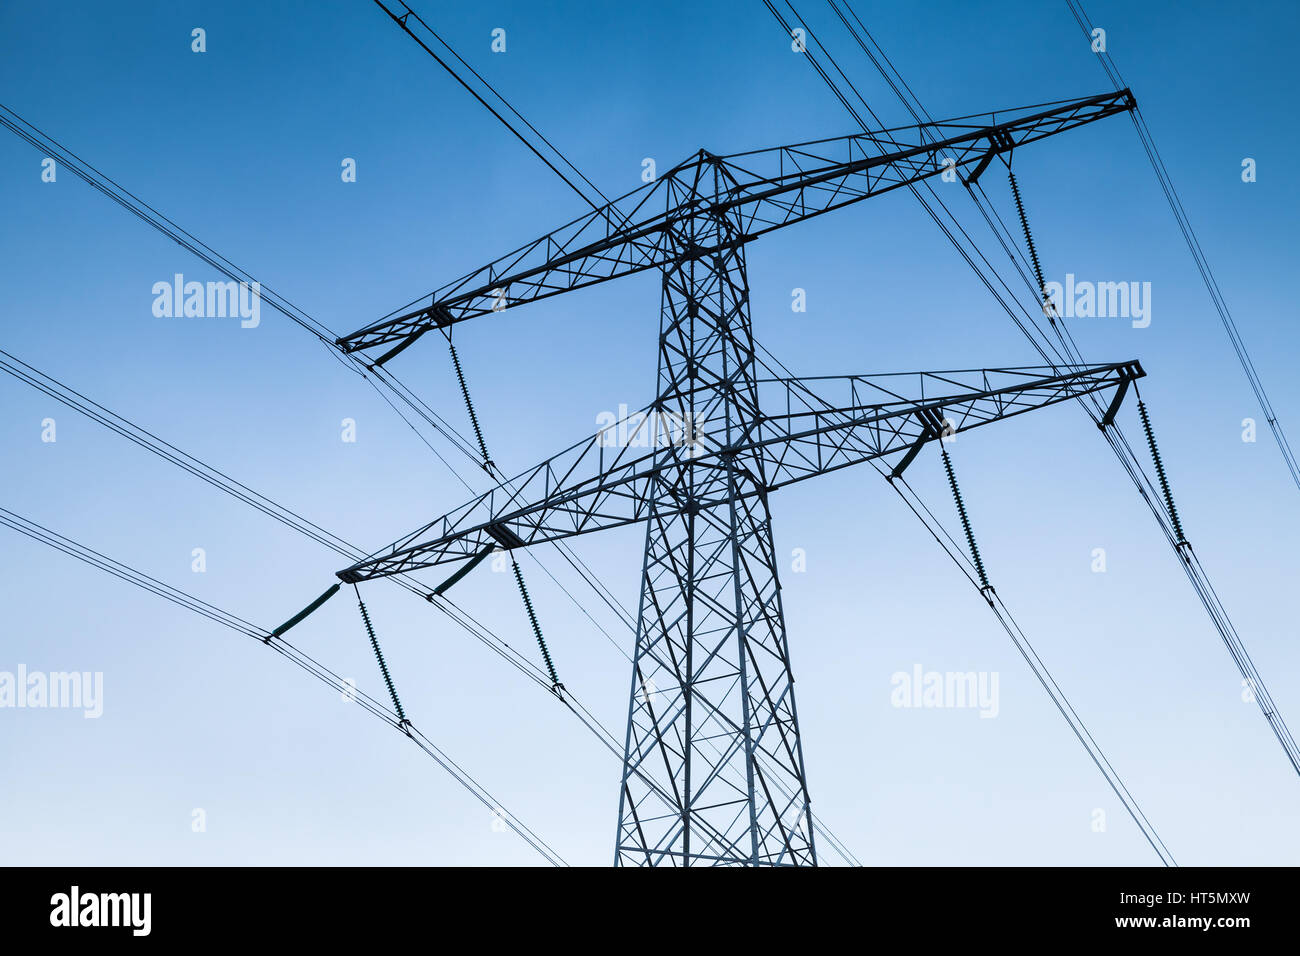 Transmission power tower, electricity pylon over blue sky. Steel lattice tower, used to support an overhead power line Stock Photo